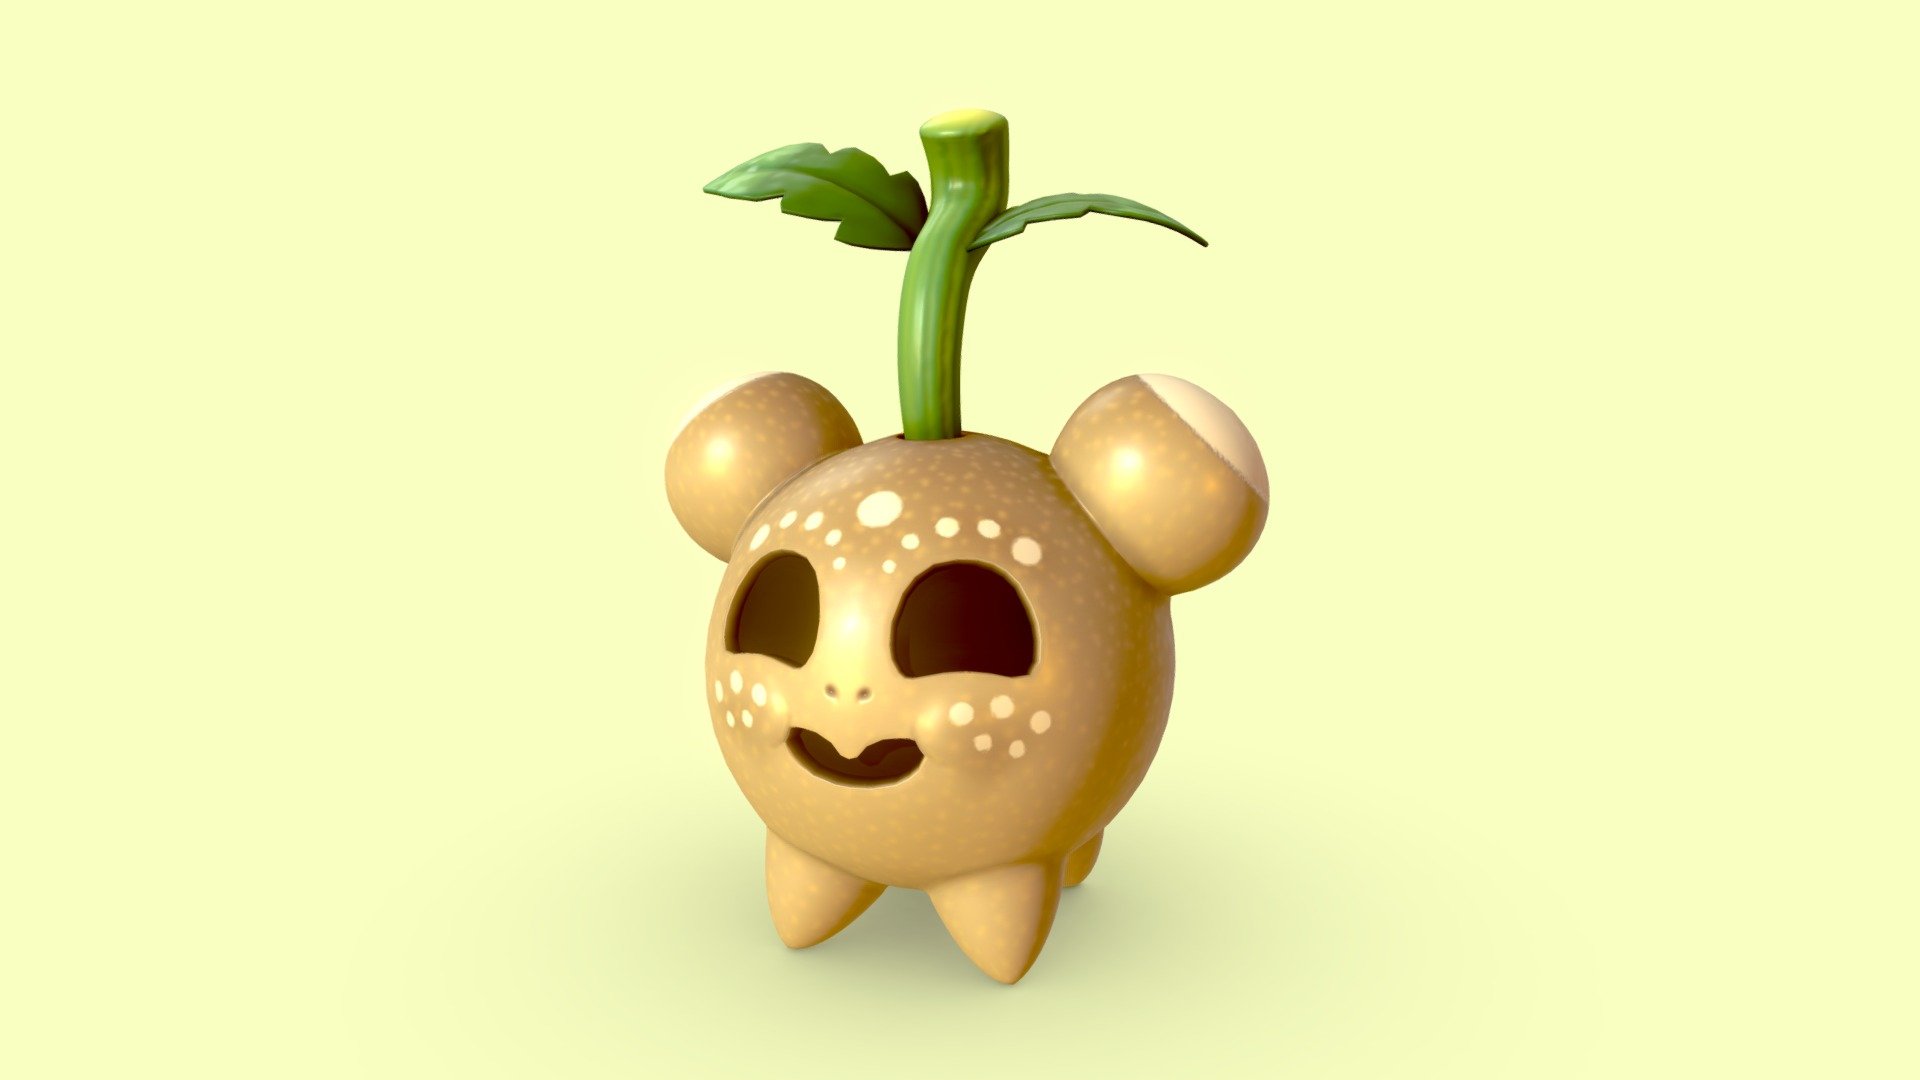 A drakky fruit inspired by the Brown Asian Pear, designed by my pal, SandstormerArt.
Follow her on Twitter for more fun creature concepts: https://twitter.com/SandstormerArt - Asian Pear Drakky Fruit - 3D model by Dex Jones (@DexJones) 3d model